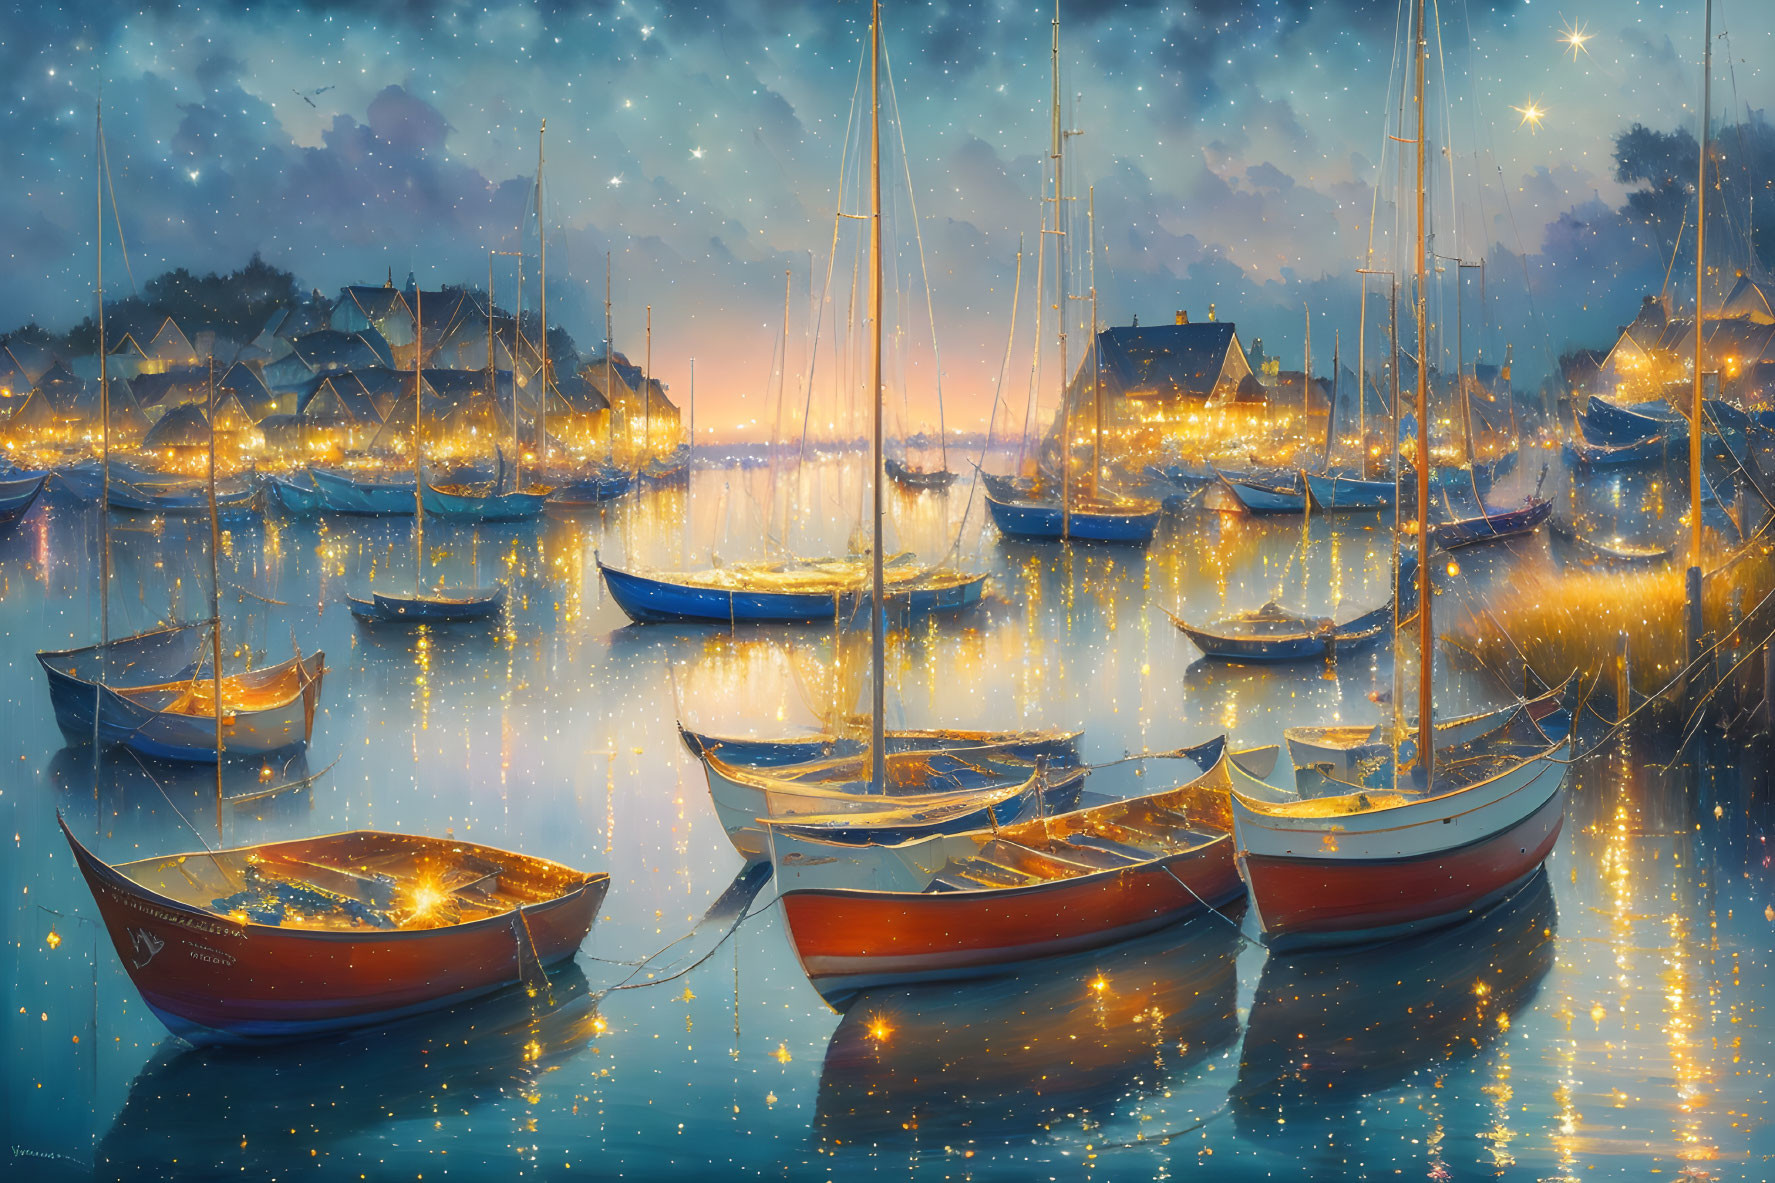 Tranquil harbor scene with sailboats, starry sky, reflections, and cozy cottages